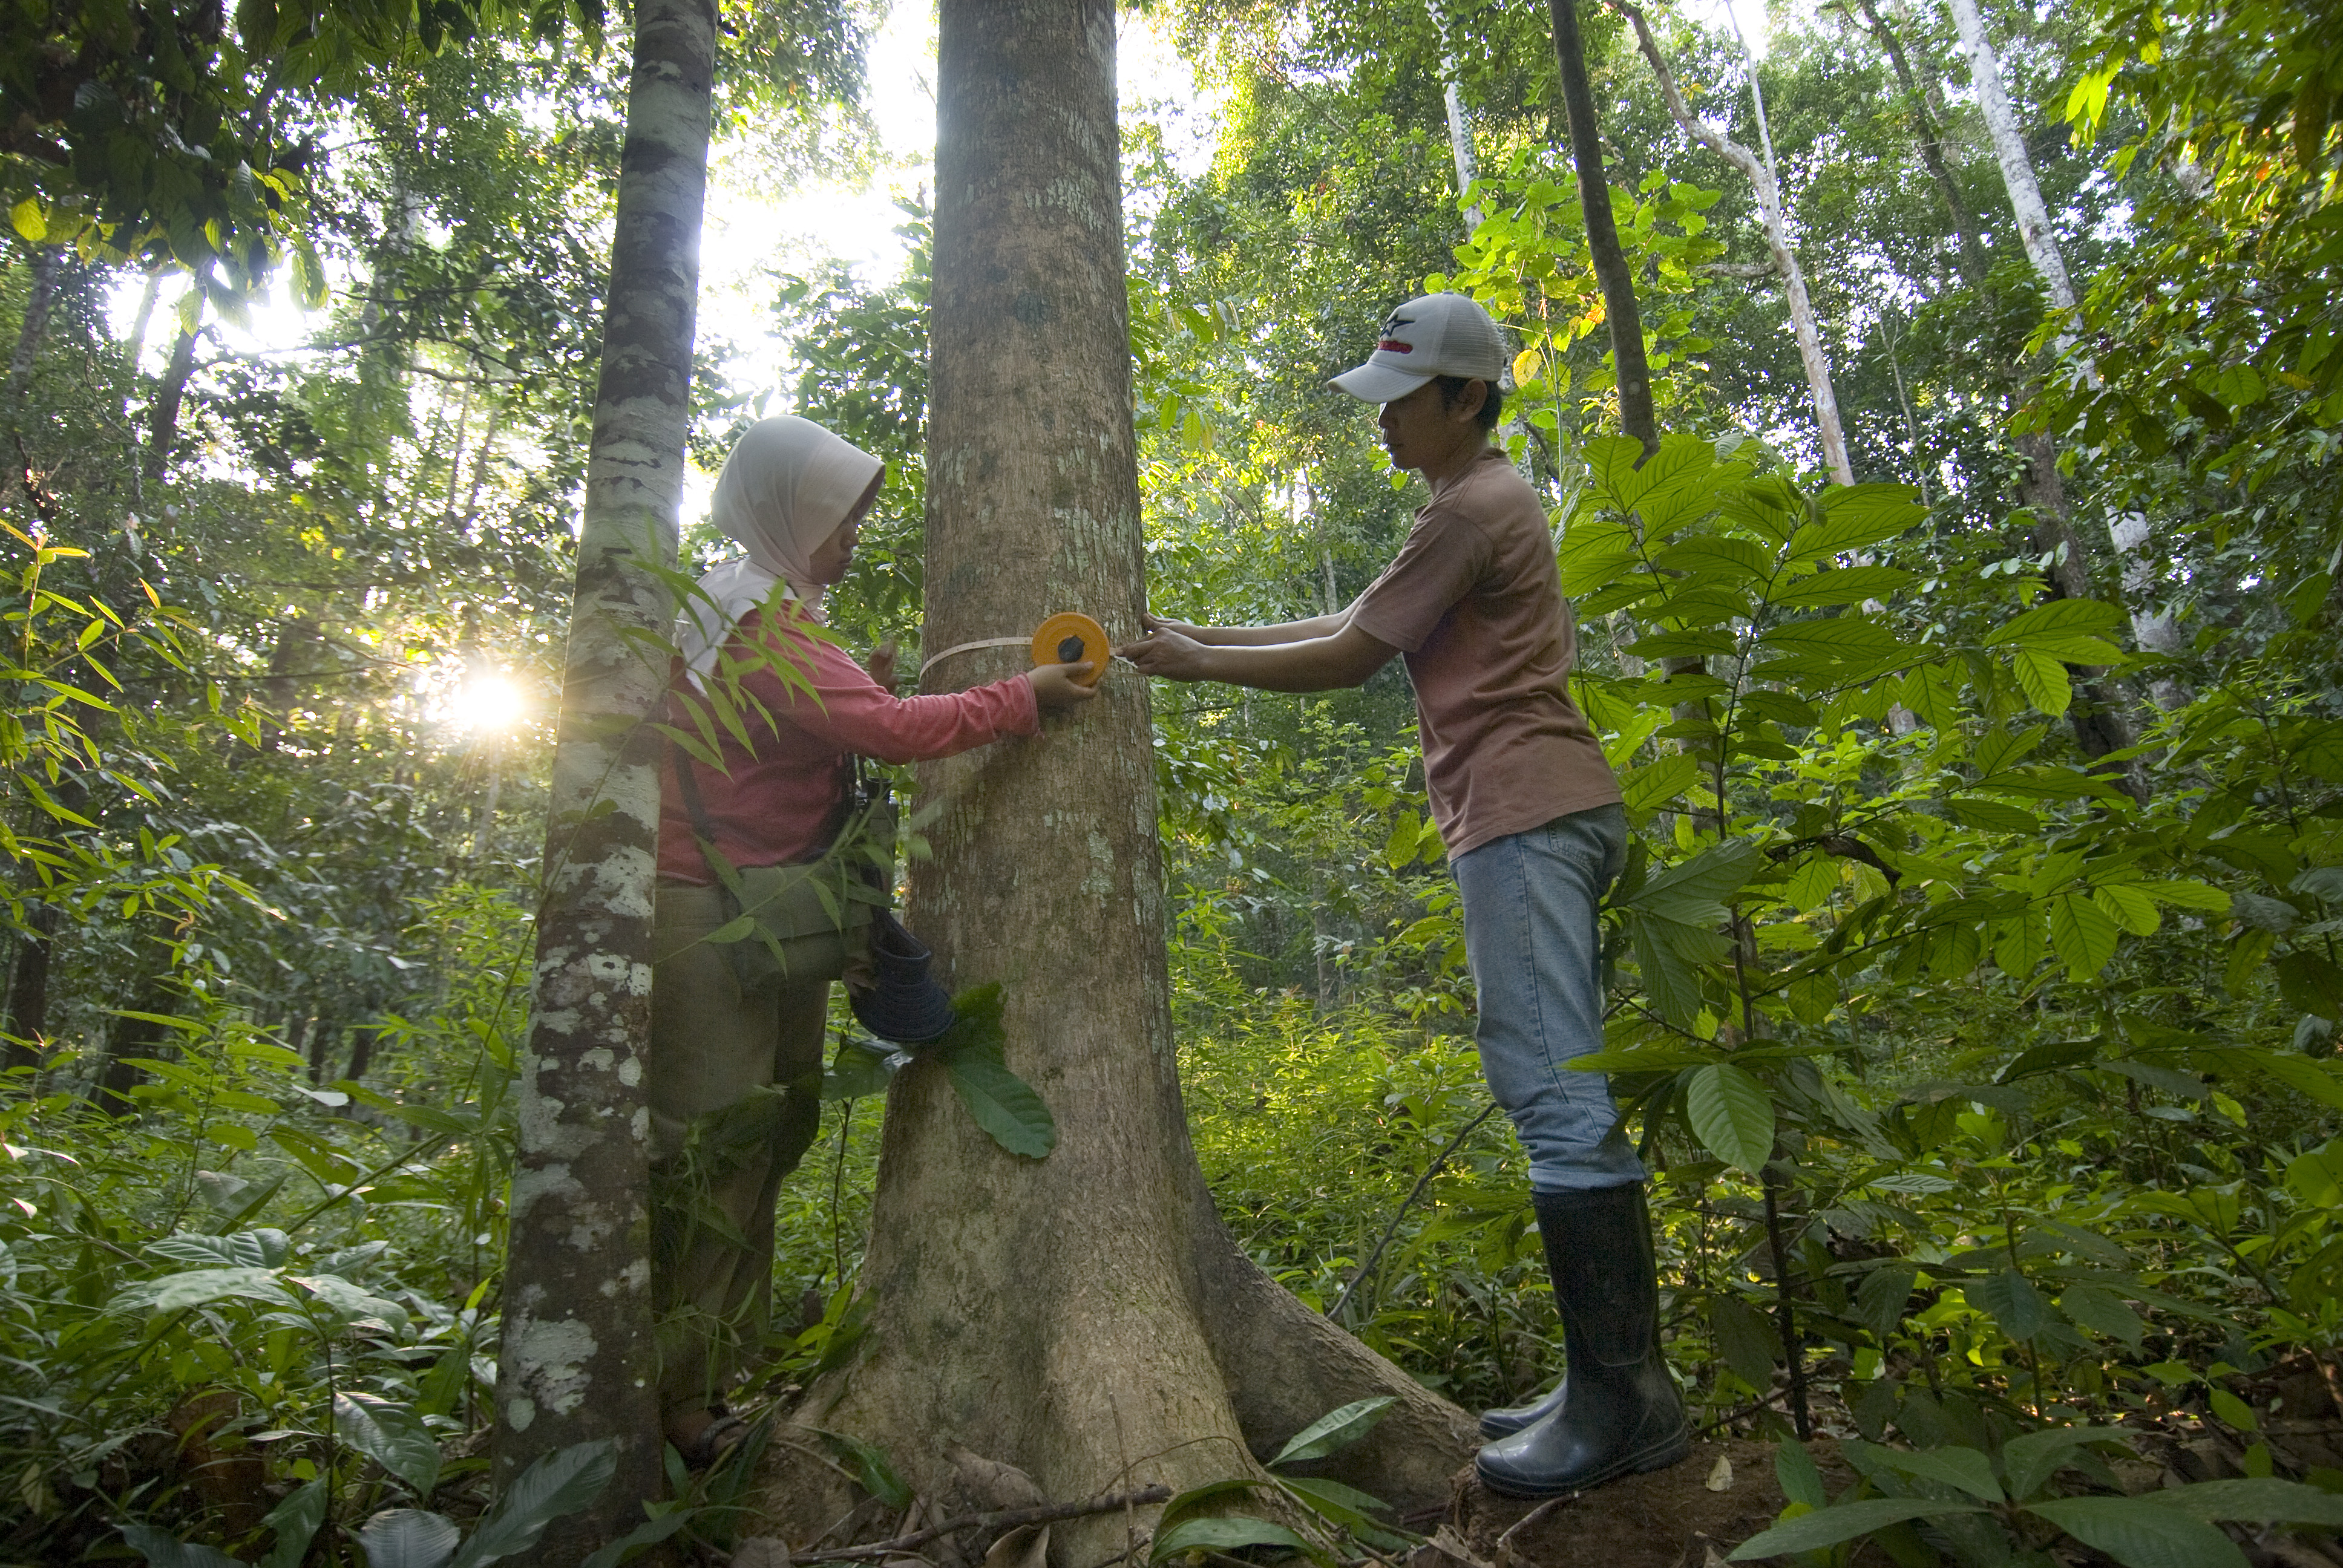 Two people measure the circumference of a tree trunk.